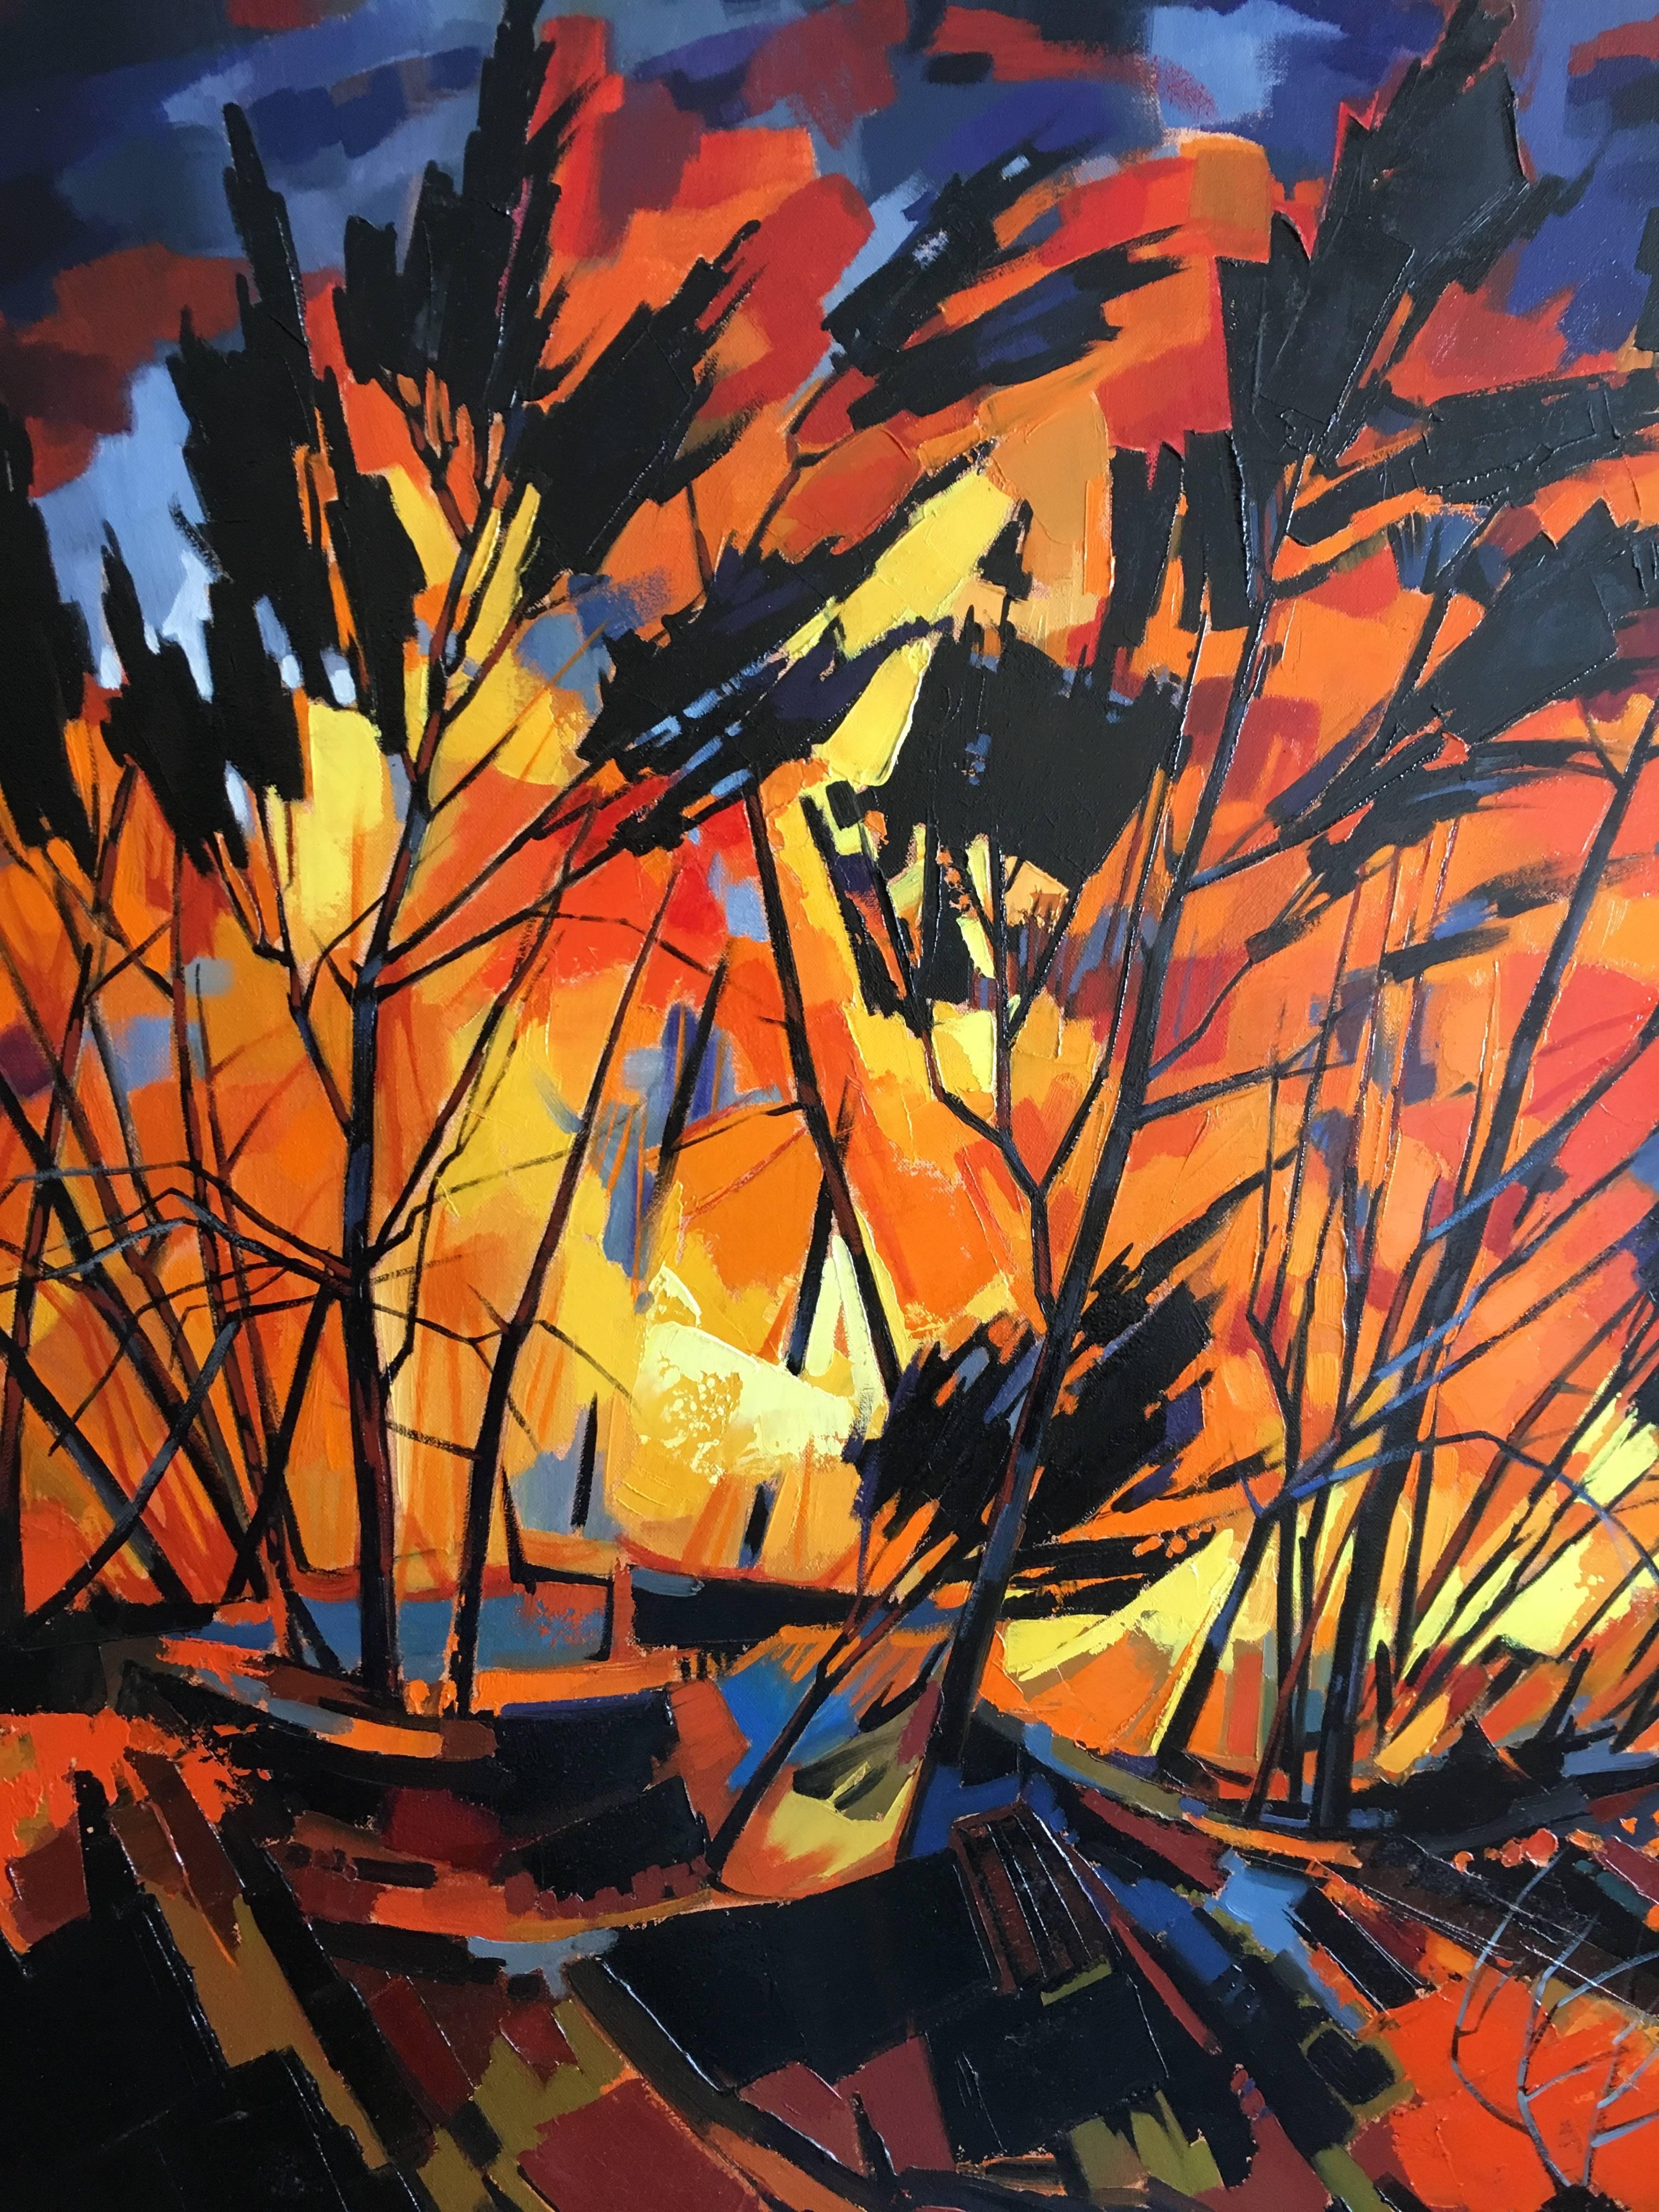 Fire in The Landes forest, expressionist landscape - Painting by Jori Duran